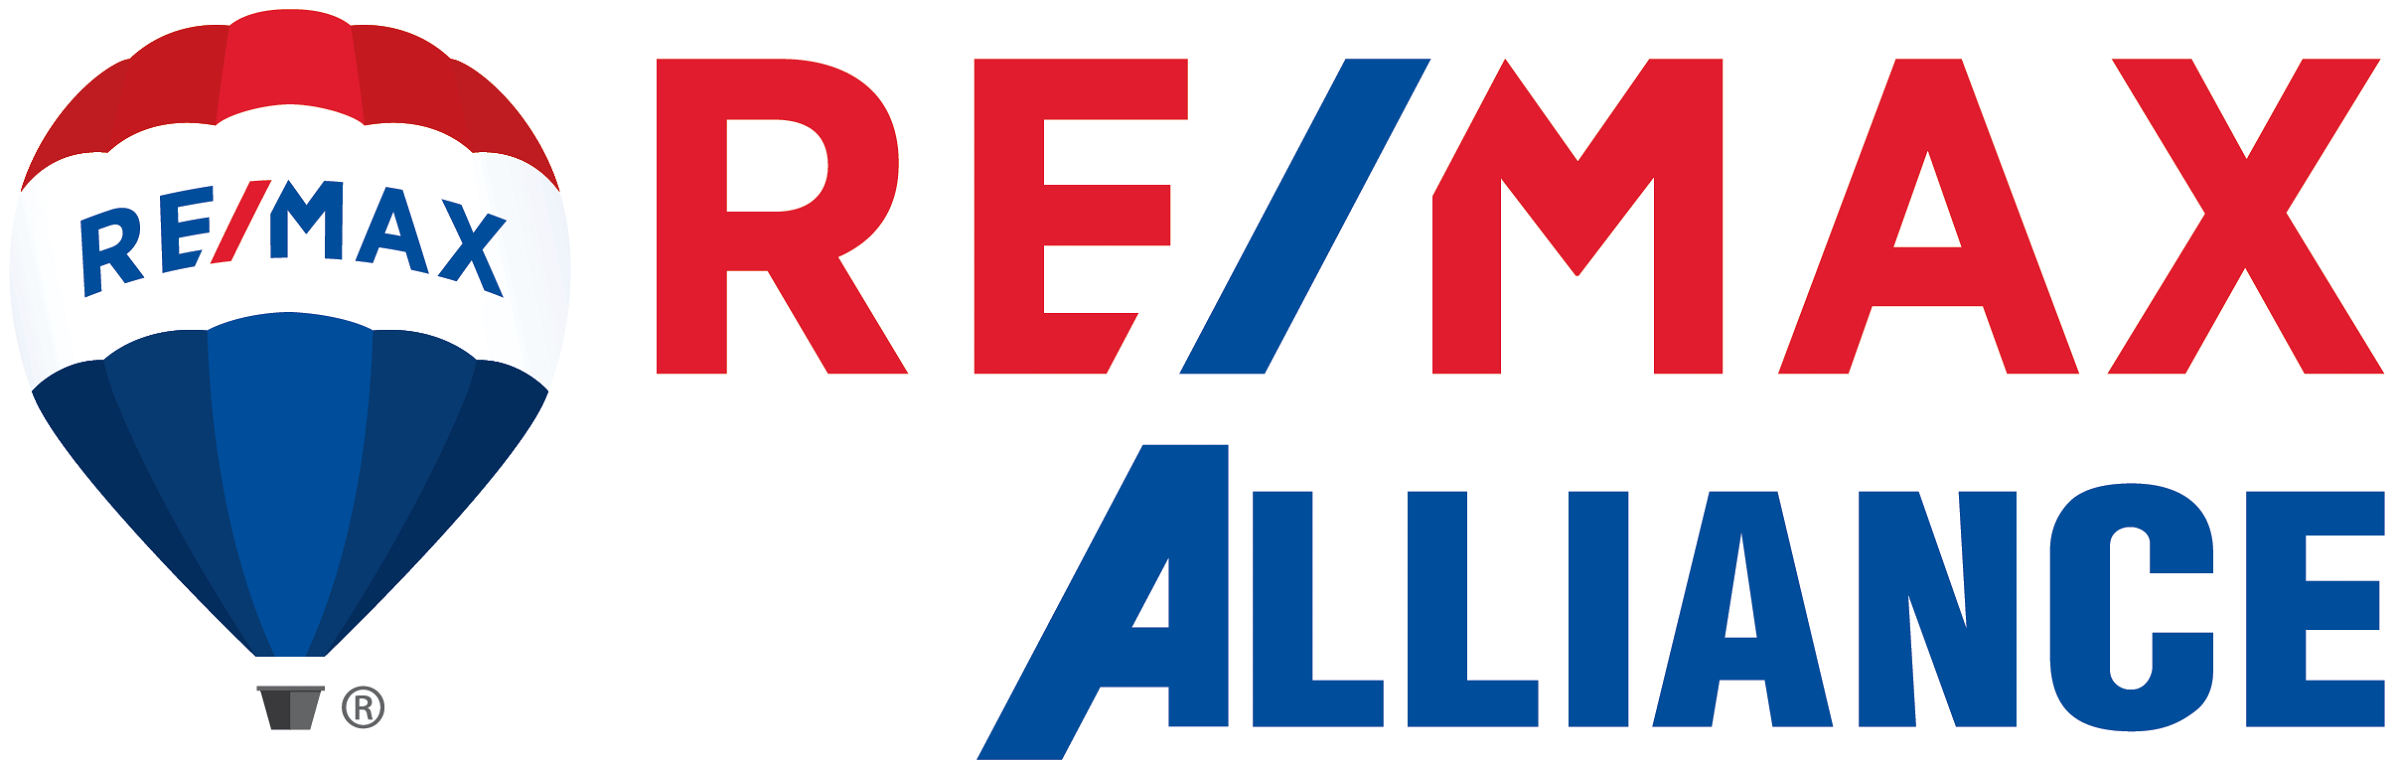 remax-alliance-with-balloon-white-outline-2